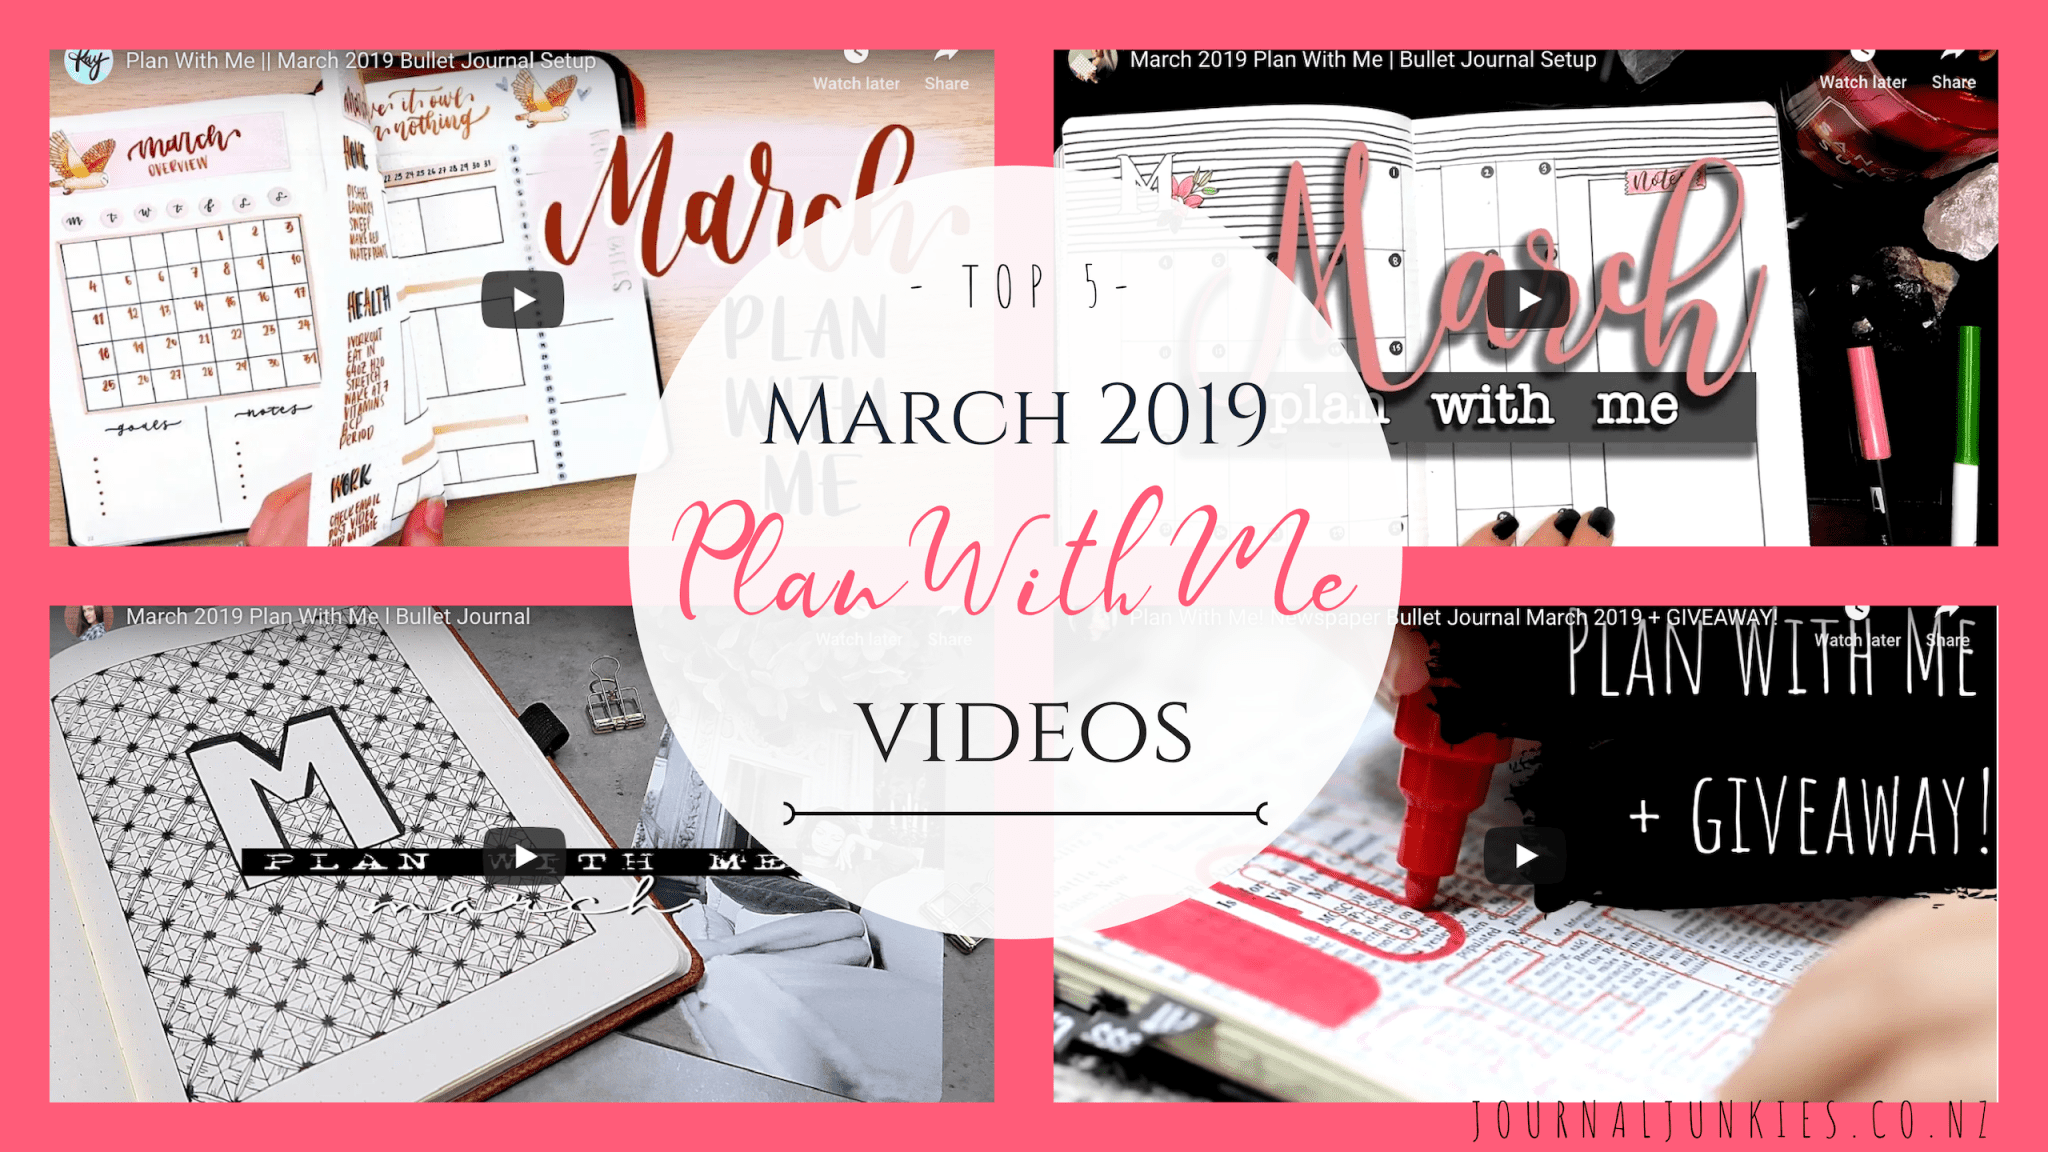 March 2019 Plan With Me | Top 5 Videos